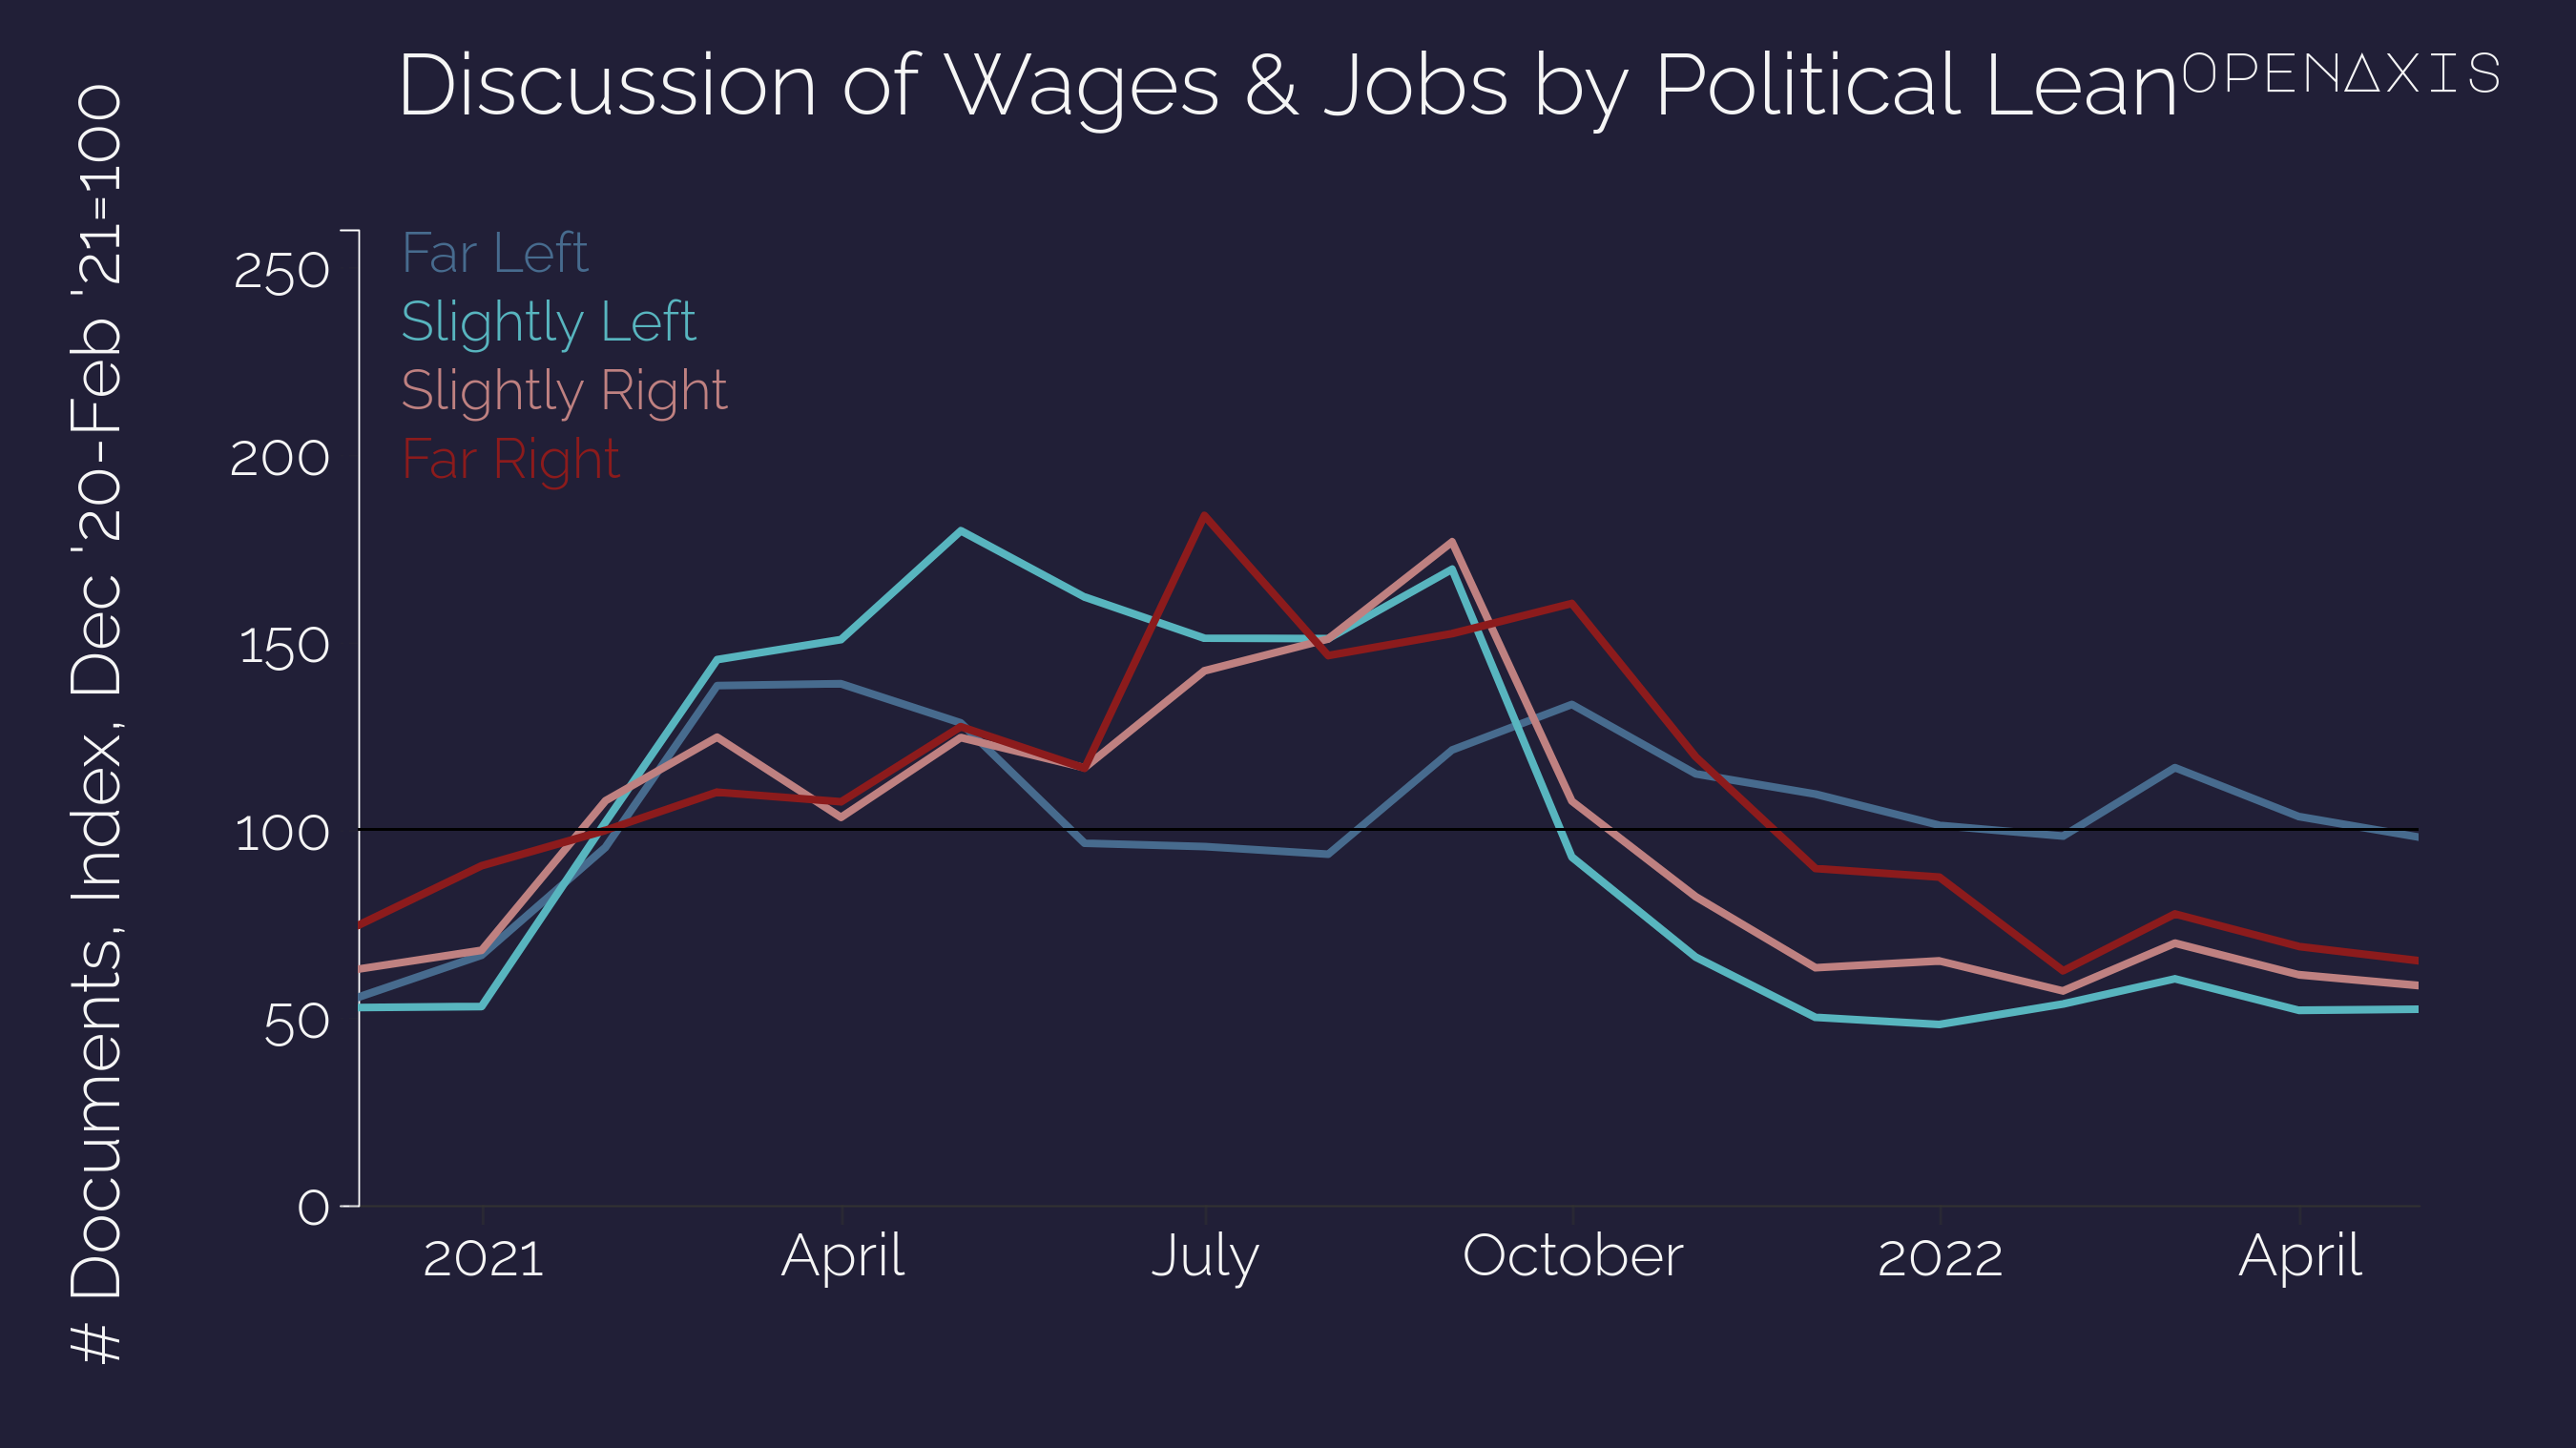 <p>More positive economic terms like “employment,” “jobs,” “raises,” and “wages” were actually talked about disproportionately less frequently by the Far Left in June, July, and August of 2021, but disproportionately more since December 2021. This while all other political orientations talked about it less than they did Dec 2020-Feb-2021.</p><p><br /></p><p>Despite how critical inflation and unemployment are - we’re experiencing the highest inflation in 40 years and we’re just 10 basis points above the lowest unemployment in 50 years - the manner in which outlets with different political orientations talk about the economy changes over time. The data suggests that outlets aligned with the party in power focus on the positives yet minimize the negatives while those not aligned with the party in power do the opposite.</p><p><br /></p><p>Source: <a href="https://app.openaxis.com/data/3871" target="_blank">PeakMetrics</a></p>